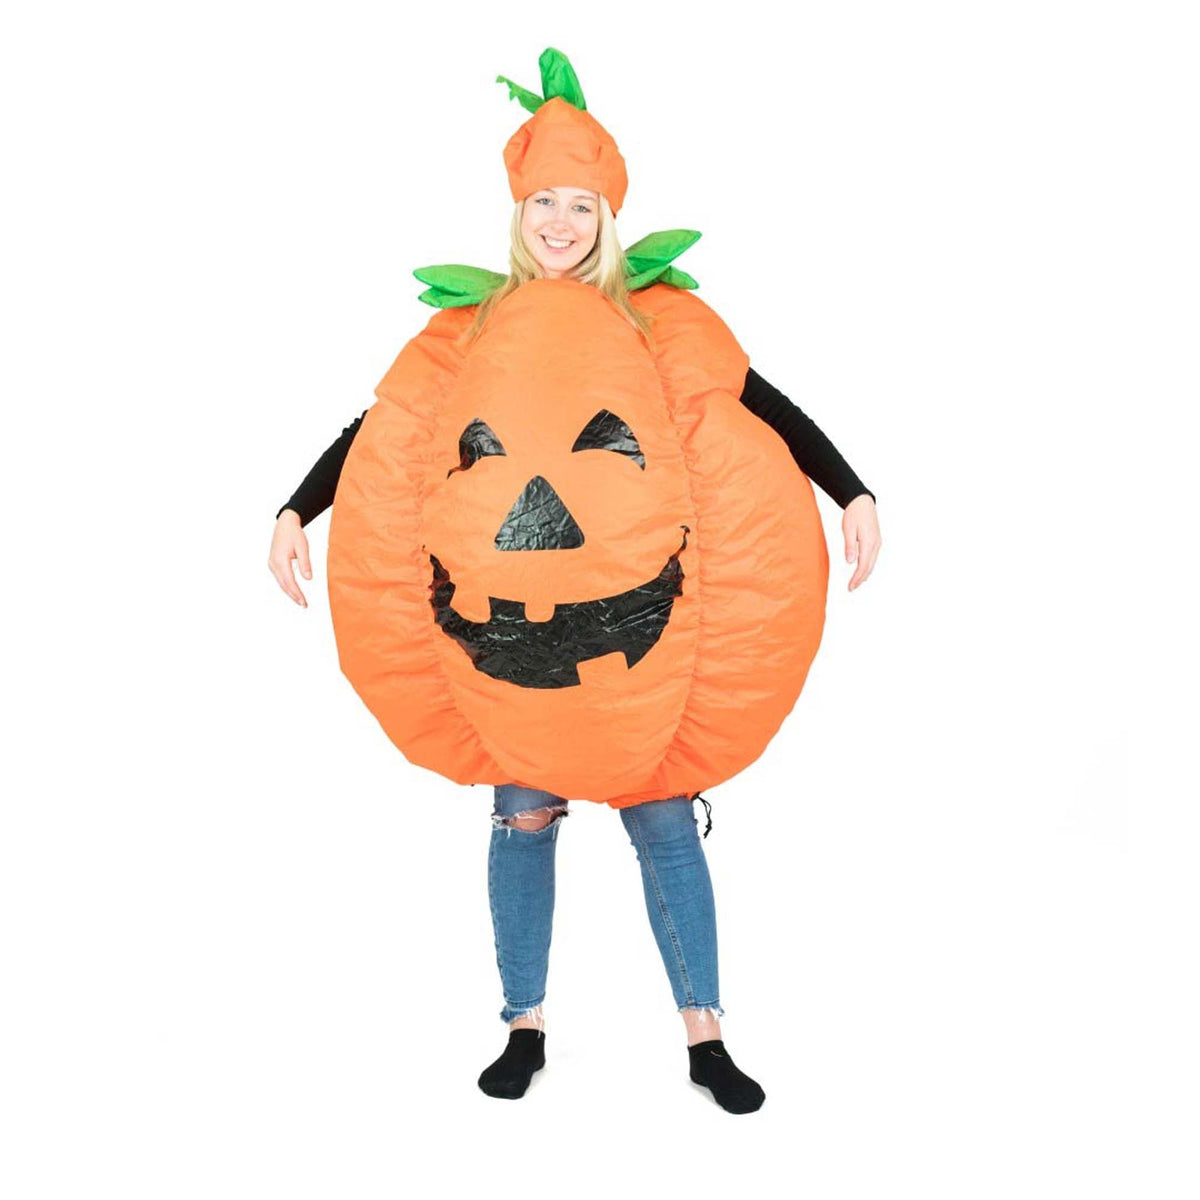 BODYSOCKS Costumes Inflatable Pumpkin Costume for Adults